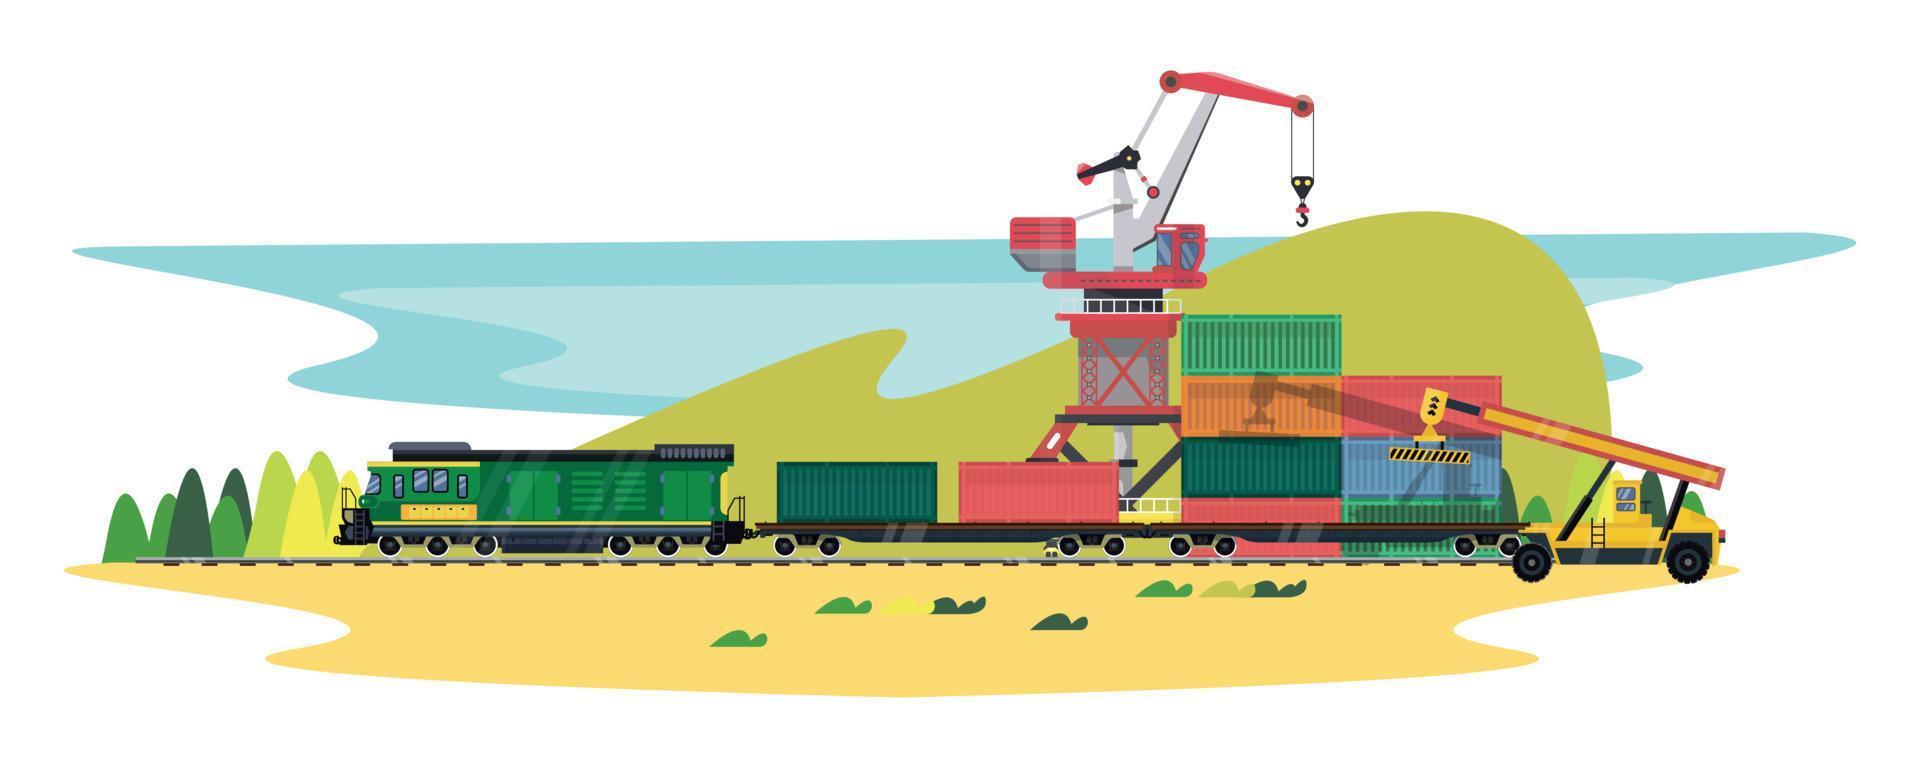 Illustration of the Railway Industry vector